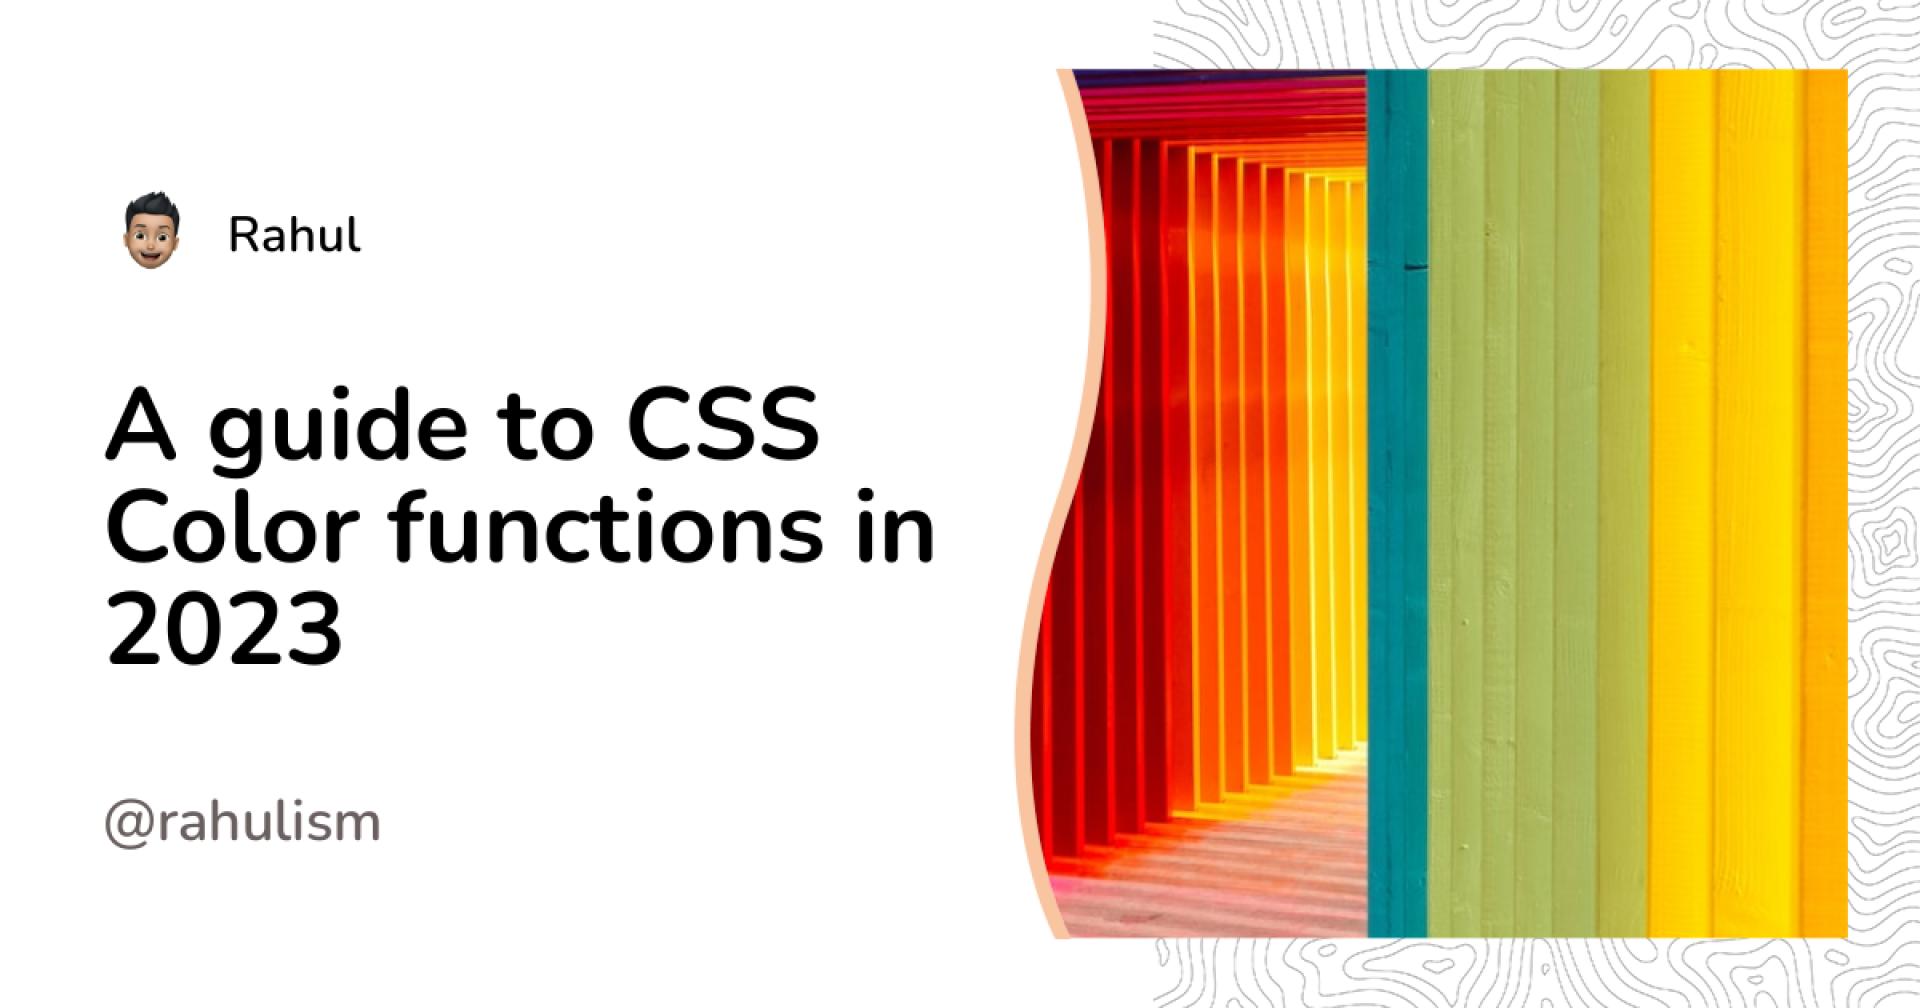 A guide to CSS Color functions in 2023